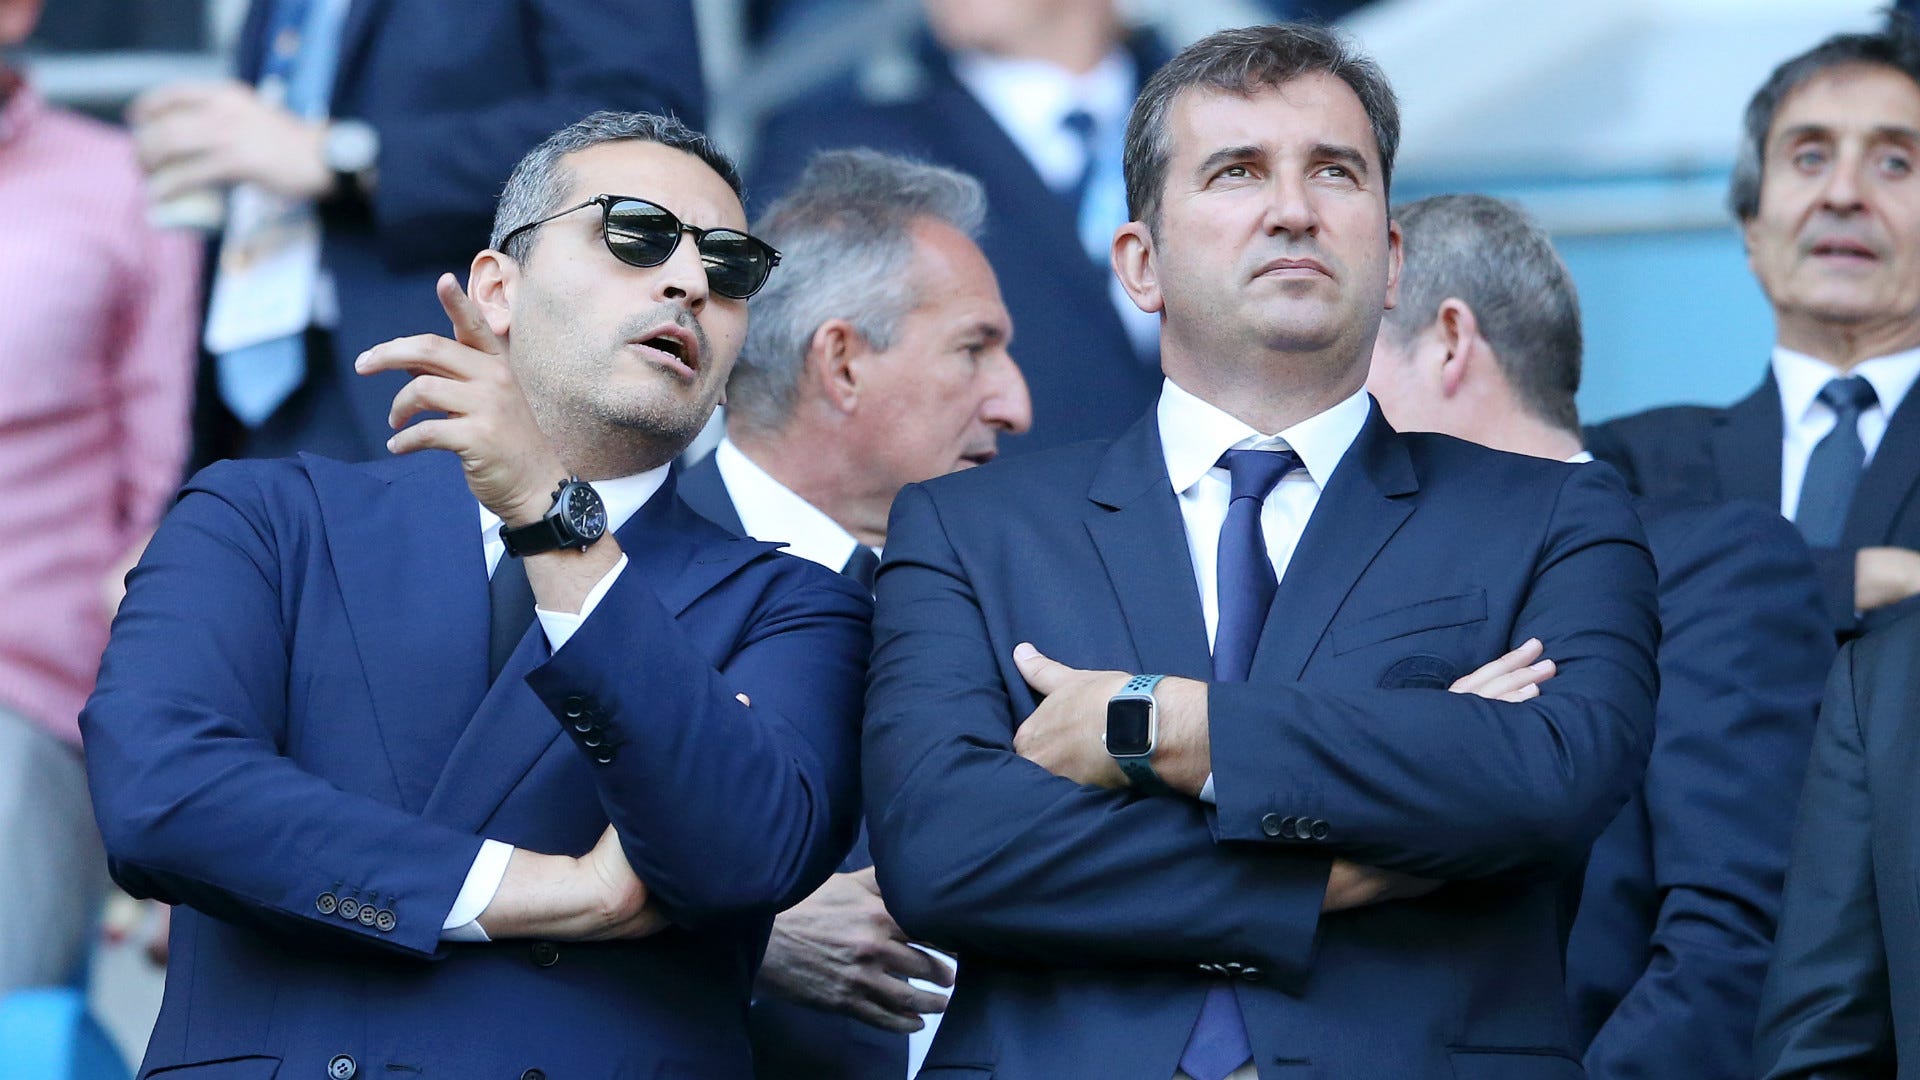 'The allegations are not true' - Man City CEO Soriano hits back after ...